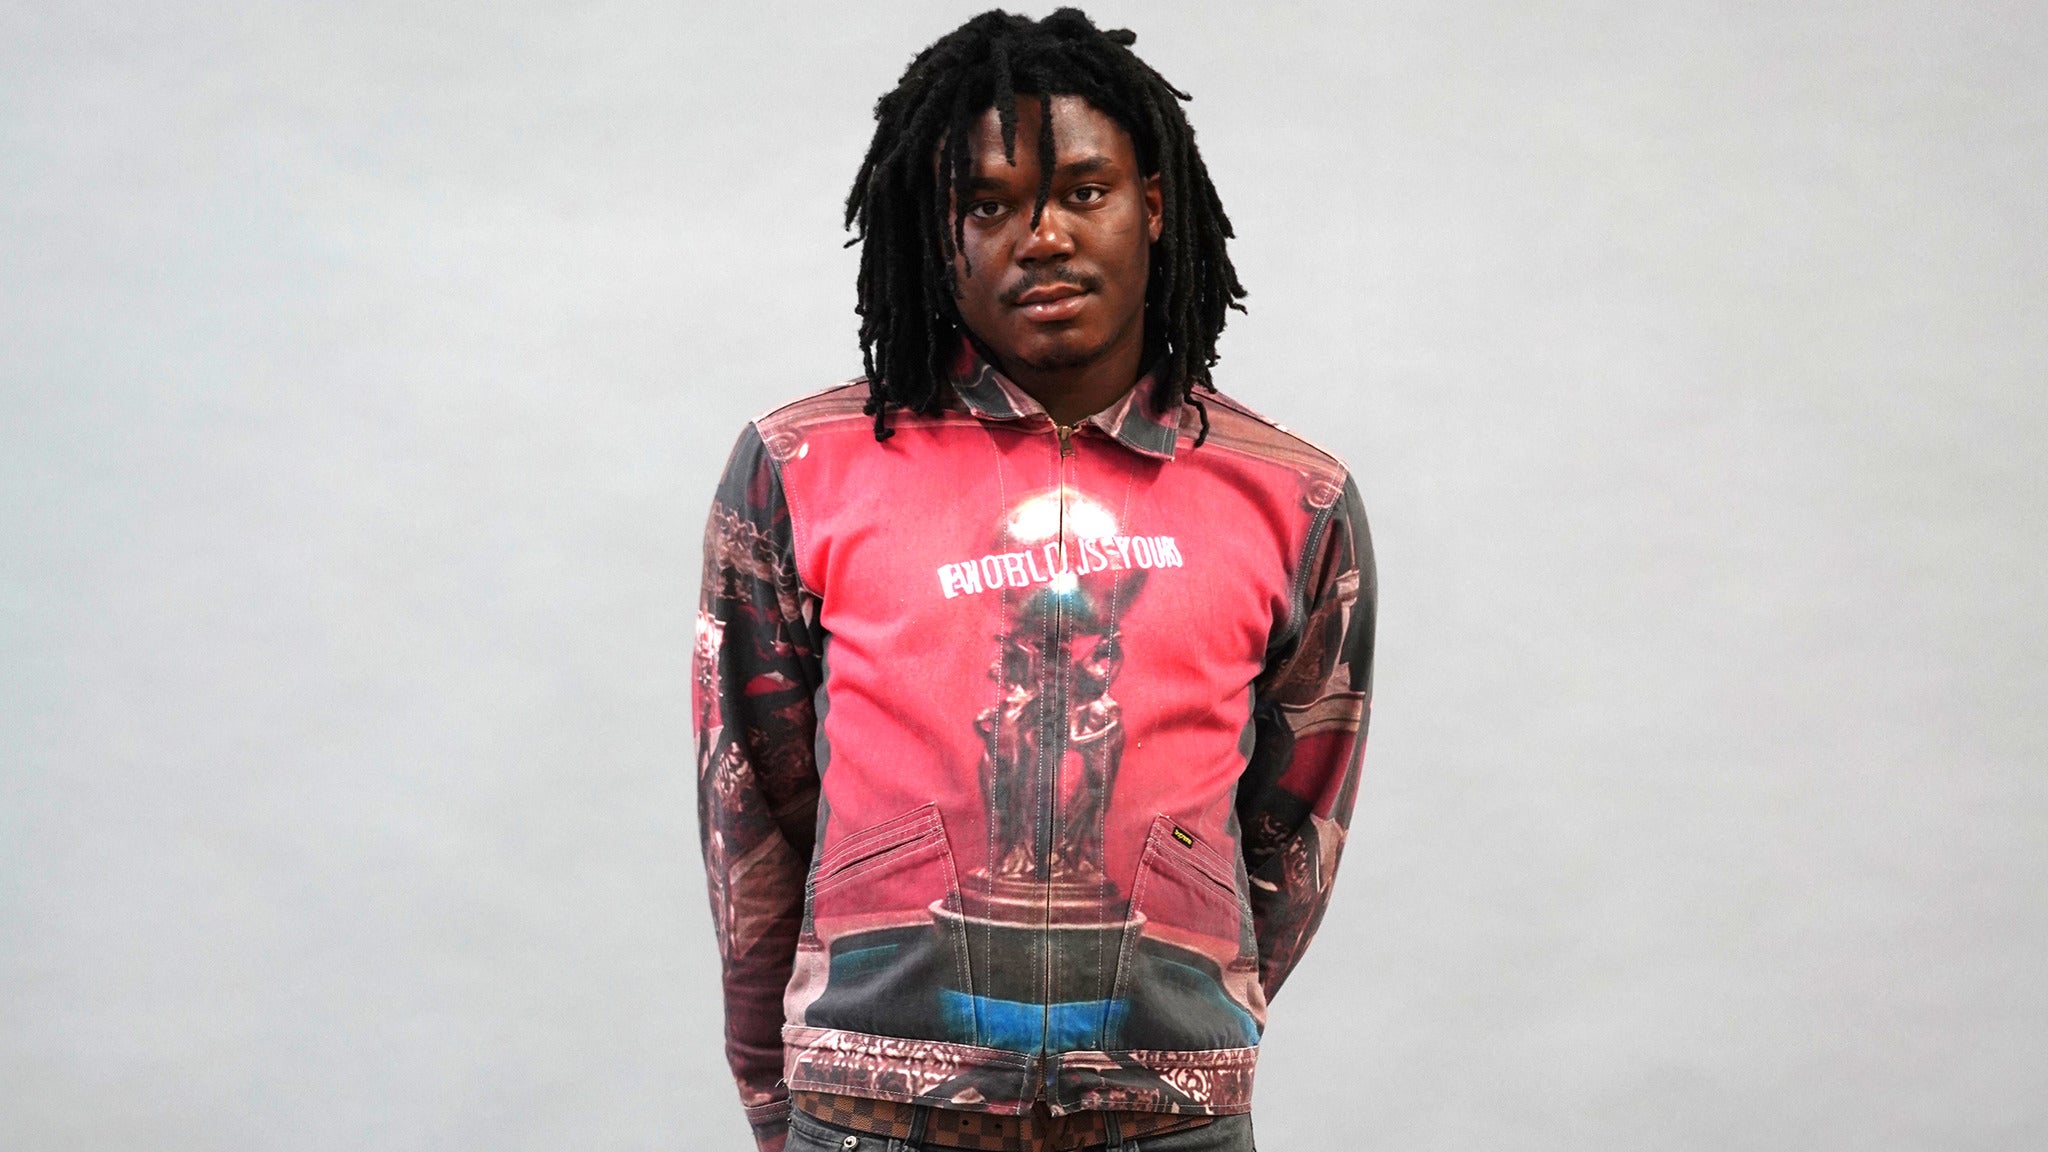 Lucki - The Wake Up Lucki Tour in Detroit promo photo for Live Nation presale offer code